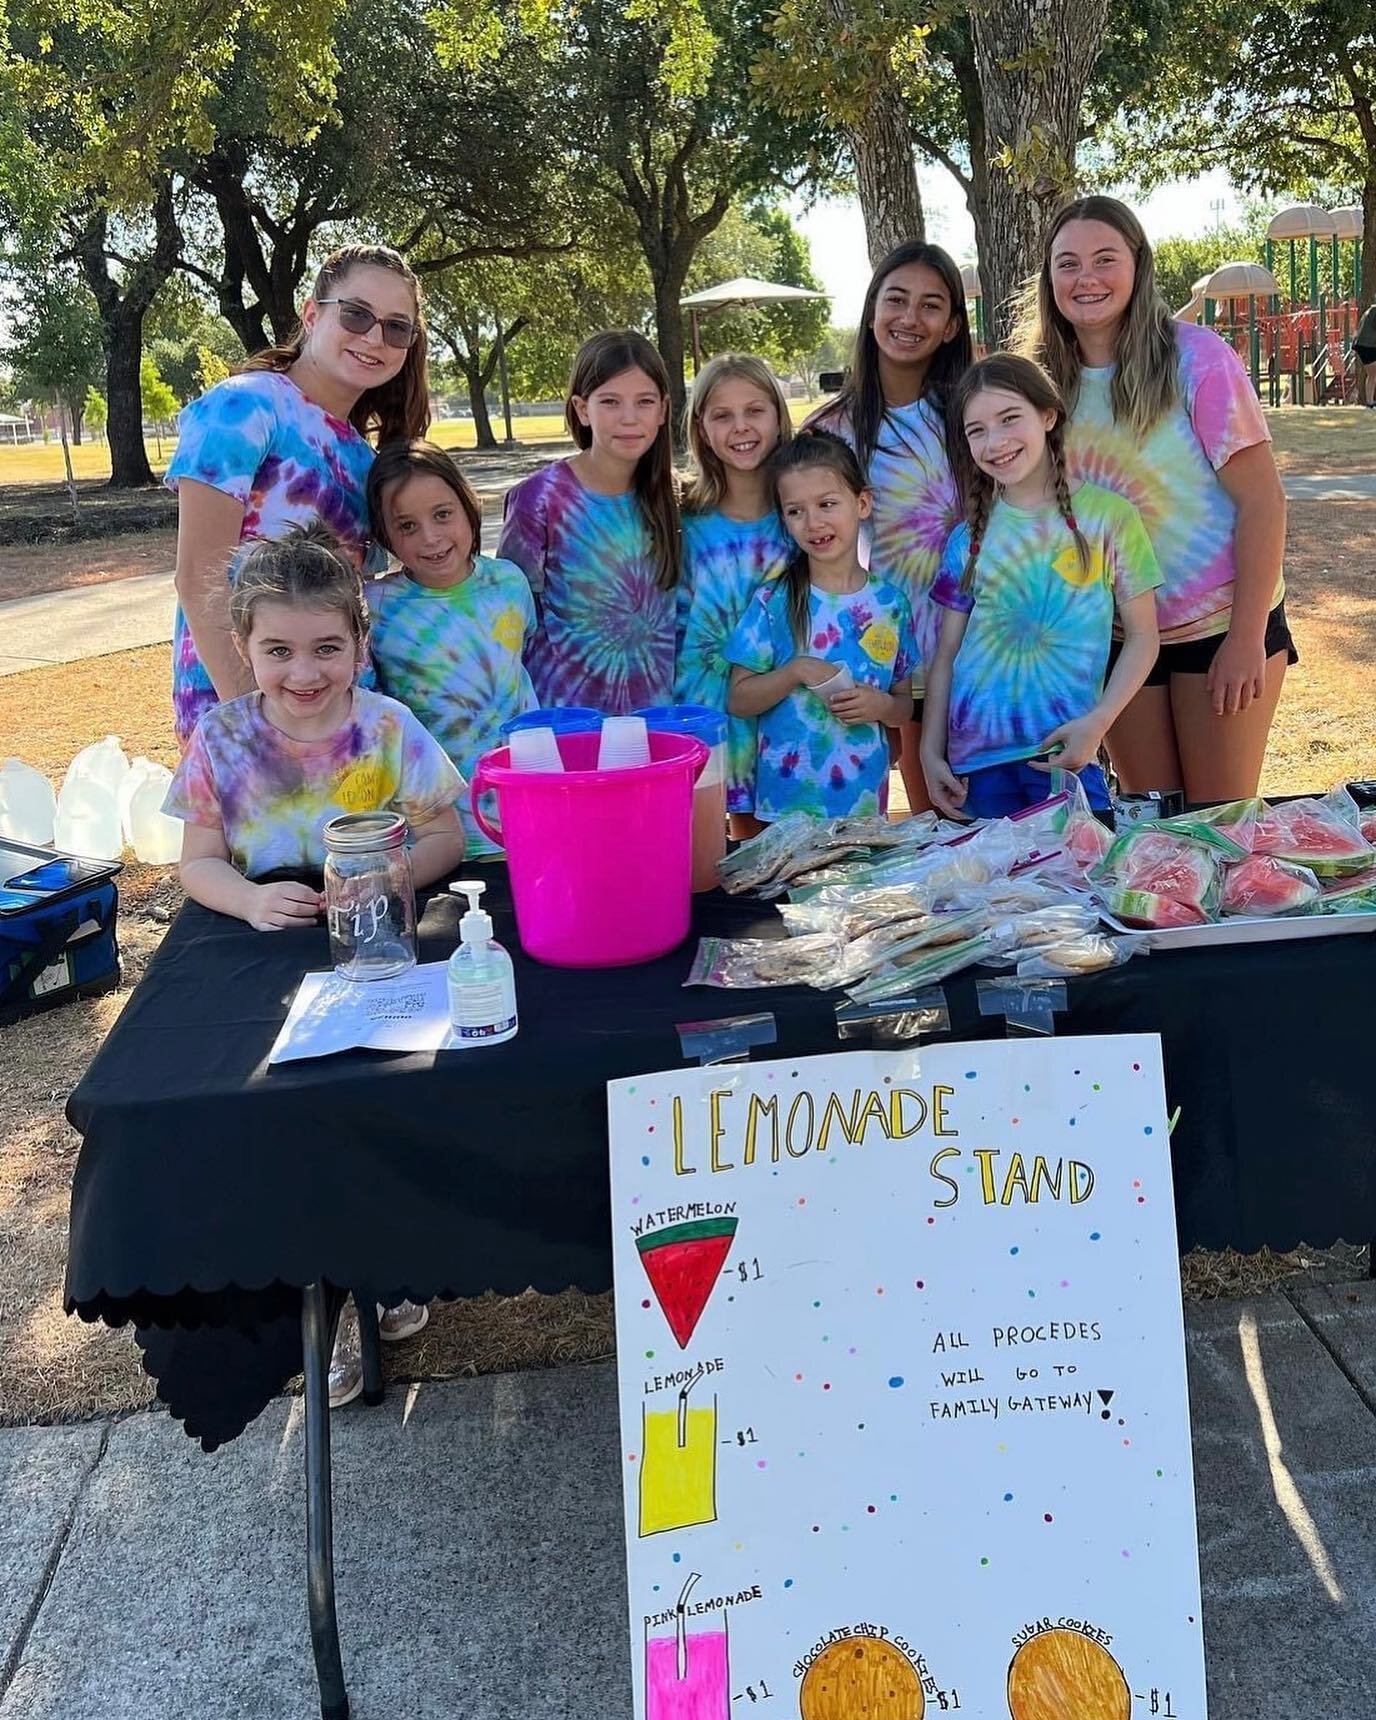 Thirsty? We&rsquo;ve got Lemon Aide!!! Campbell Green by the splash park is the spot for refreshing lemonade and yummy baked treats. Please join campers in raising funds  for @familygateway now through noon!